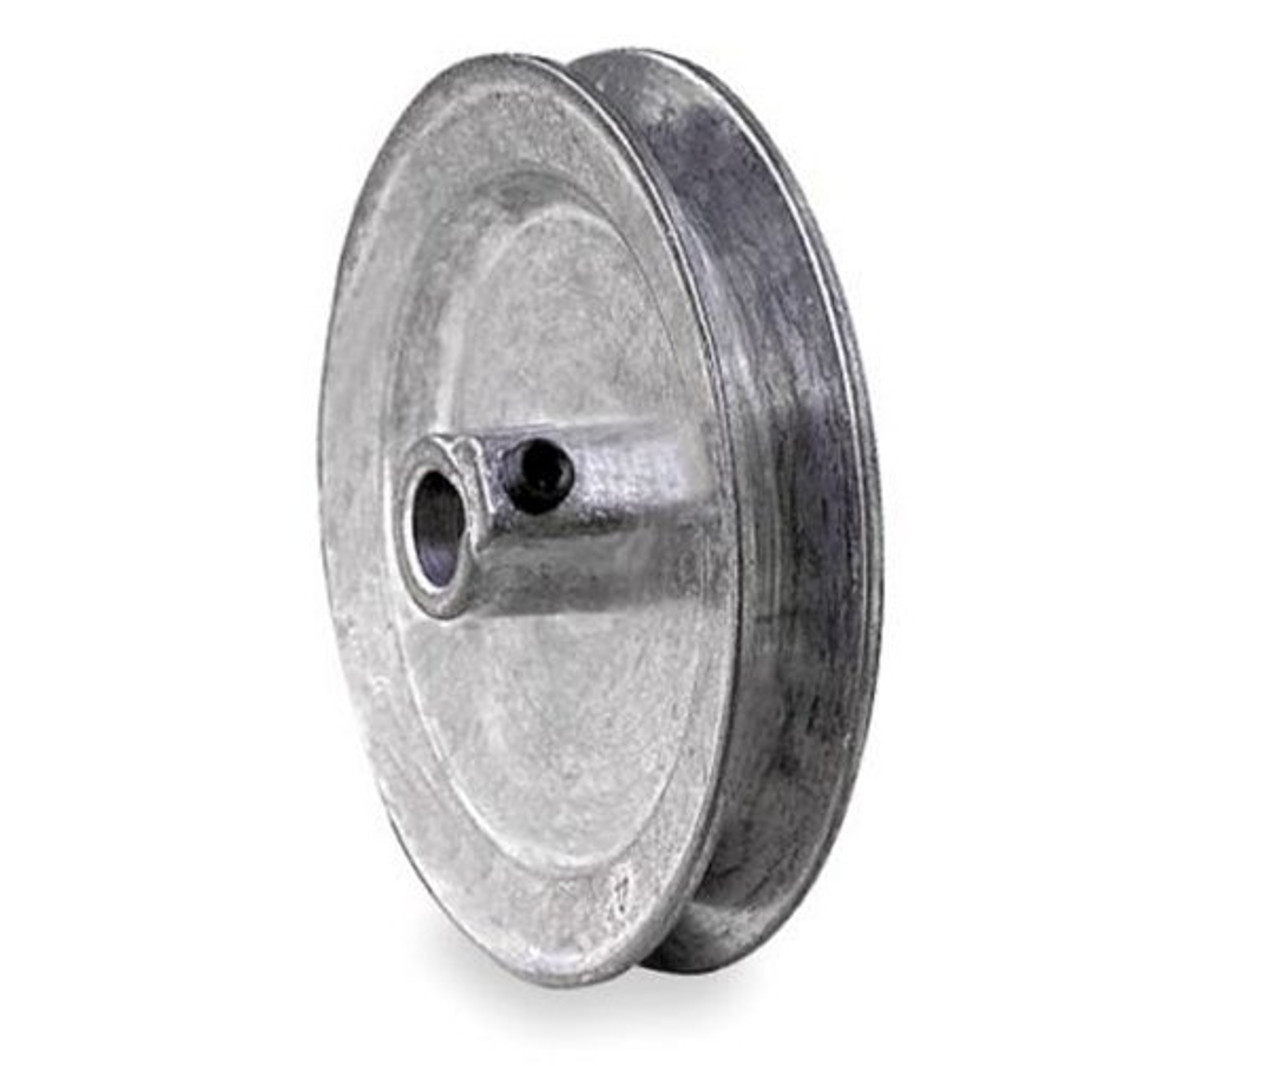 2.50 x 5/8 Double V Groove Pulley/Sheave # 2BK25X5/8 